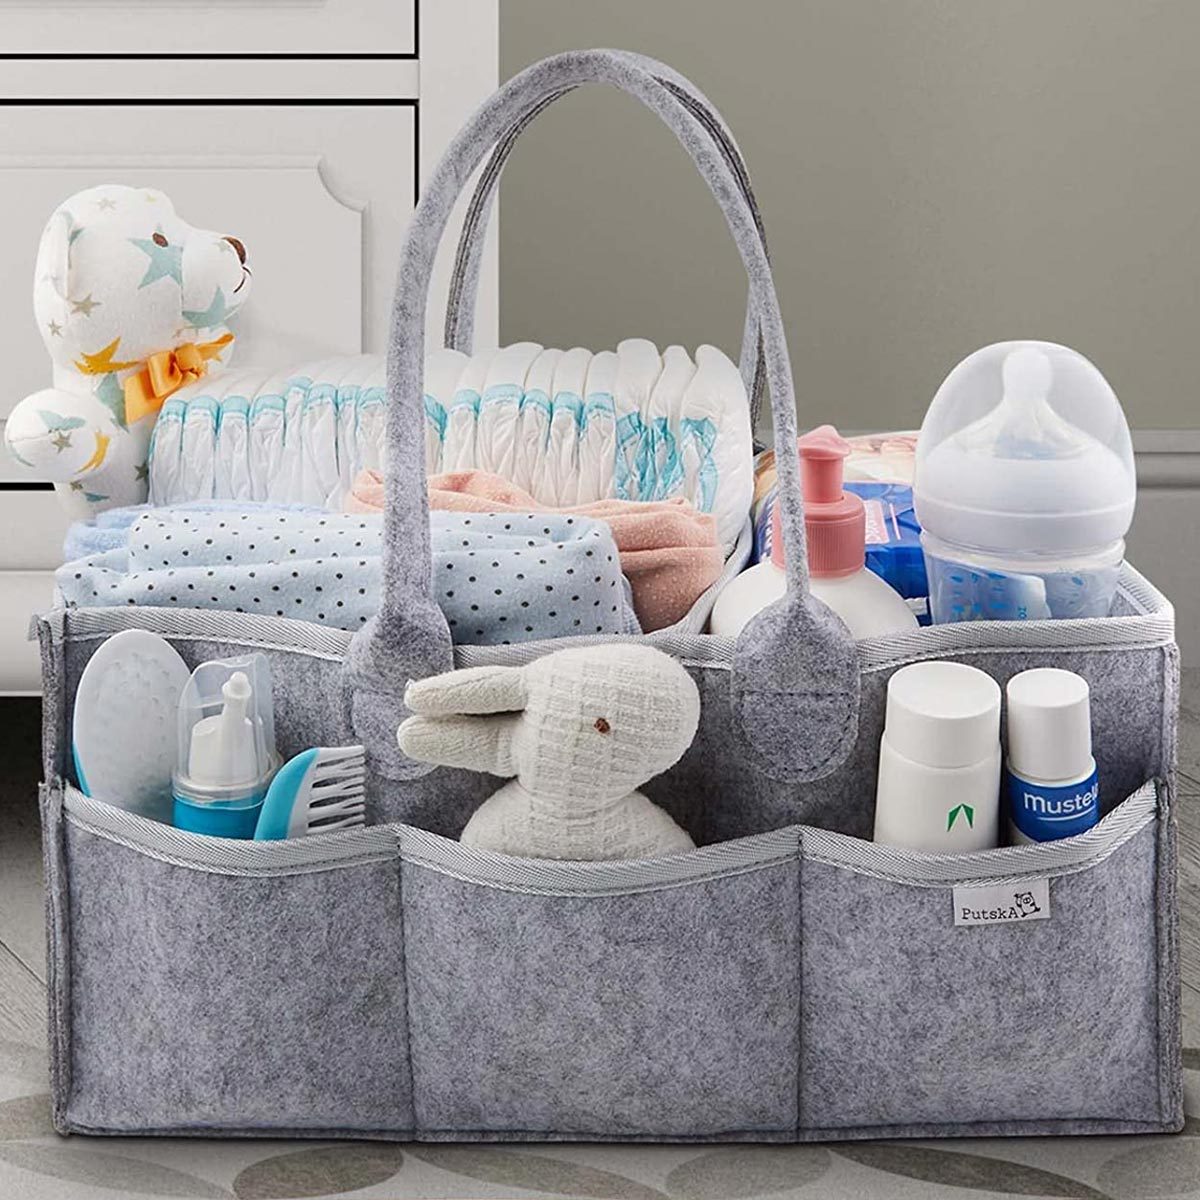 39 Baby Shower Gift Ideas That New Parents Will Actually Use